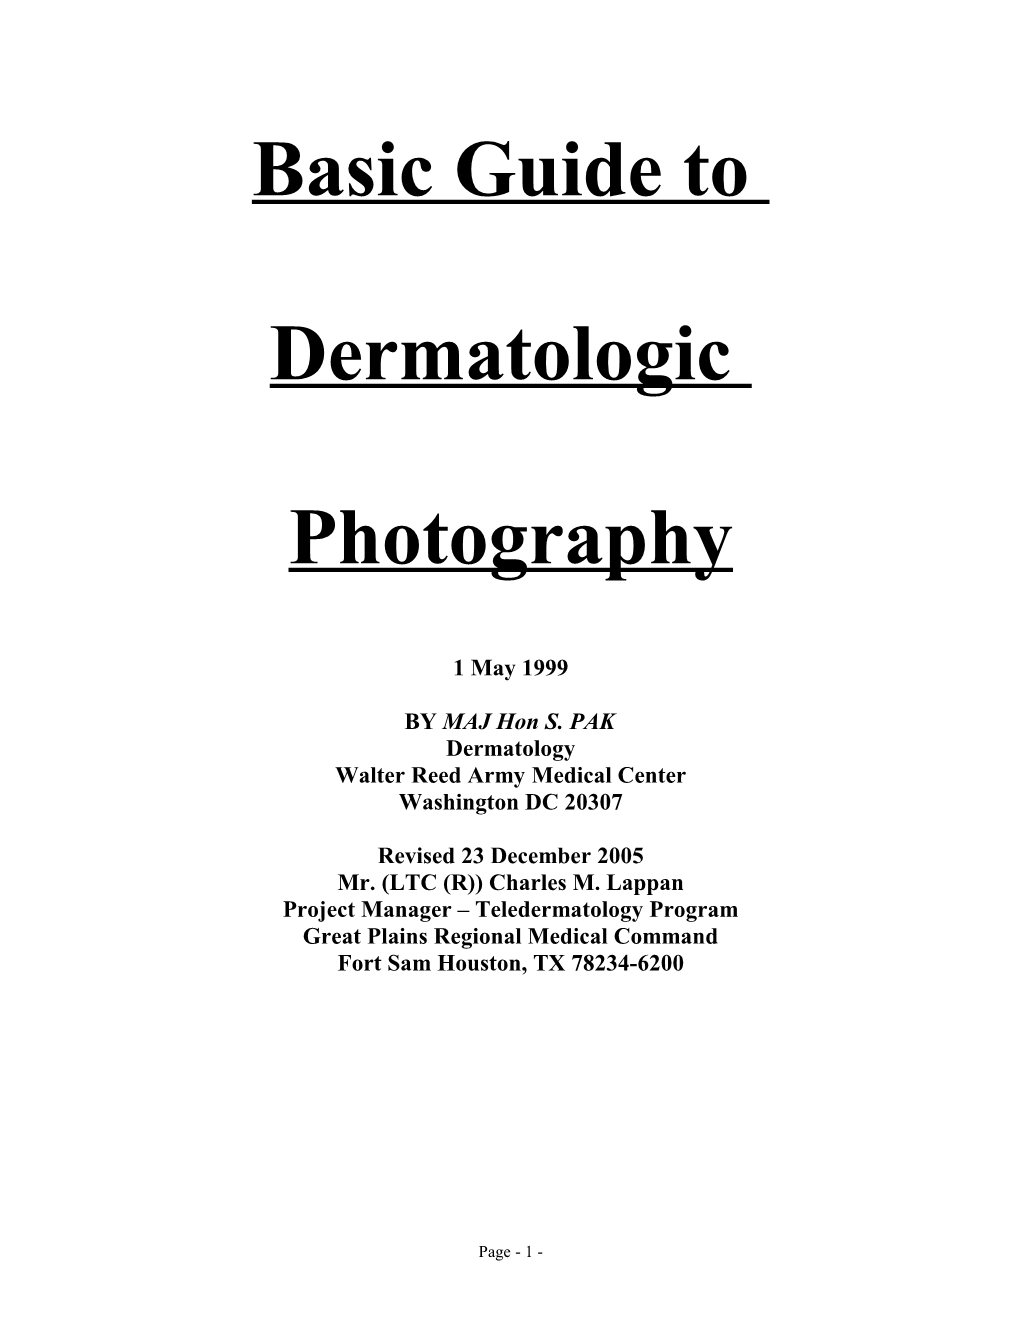 Guide to Dermatologic Photography